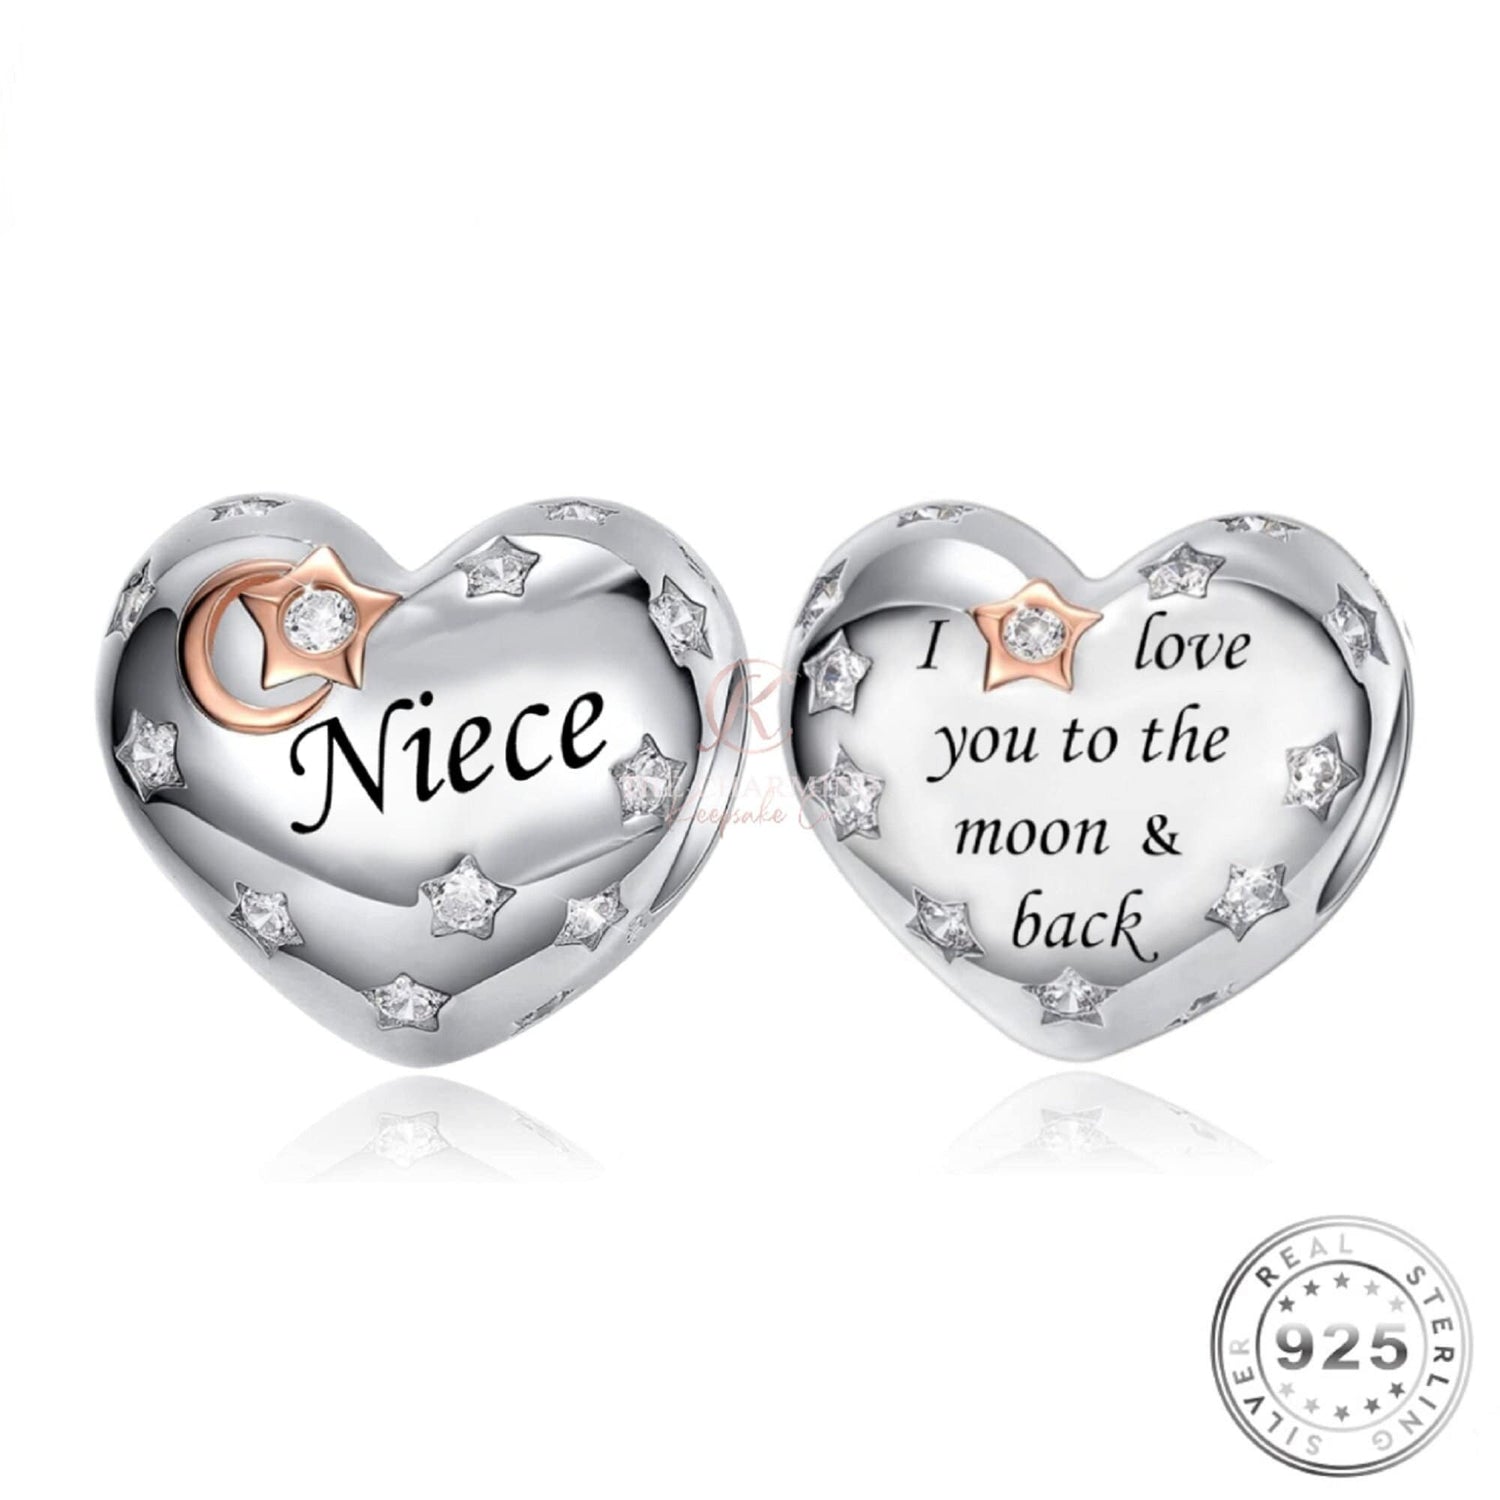 Niece Heart Charm 925 Sterling Silver - I Love You to the Moon & Back fits pandora